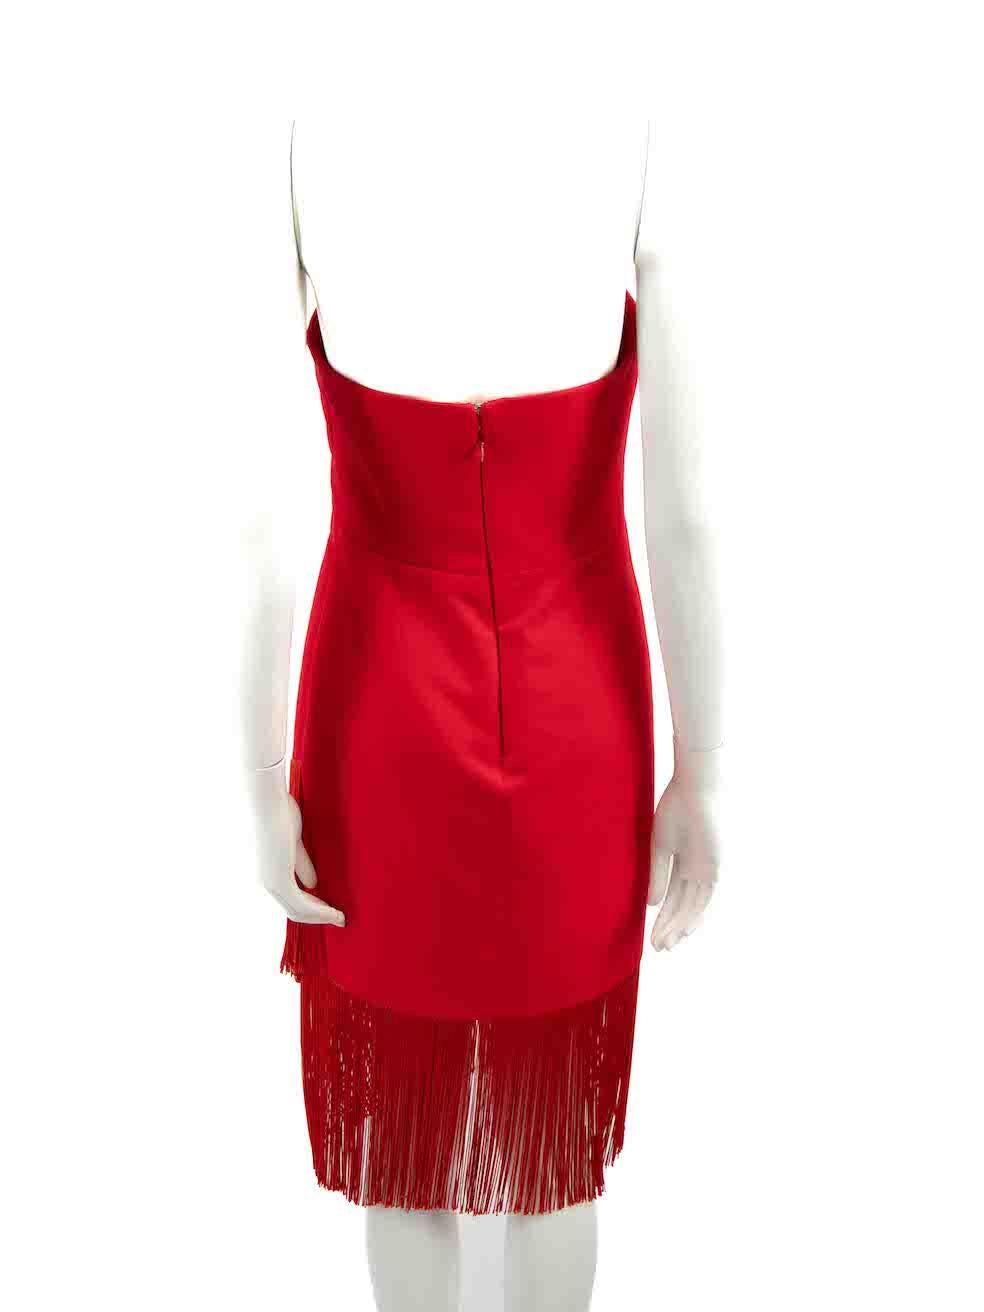 Honayda Red Tassel Strapless Mini Dress Size L In Good Condition For Sale In London, GB